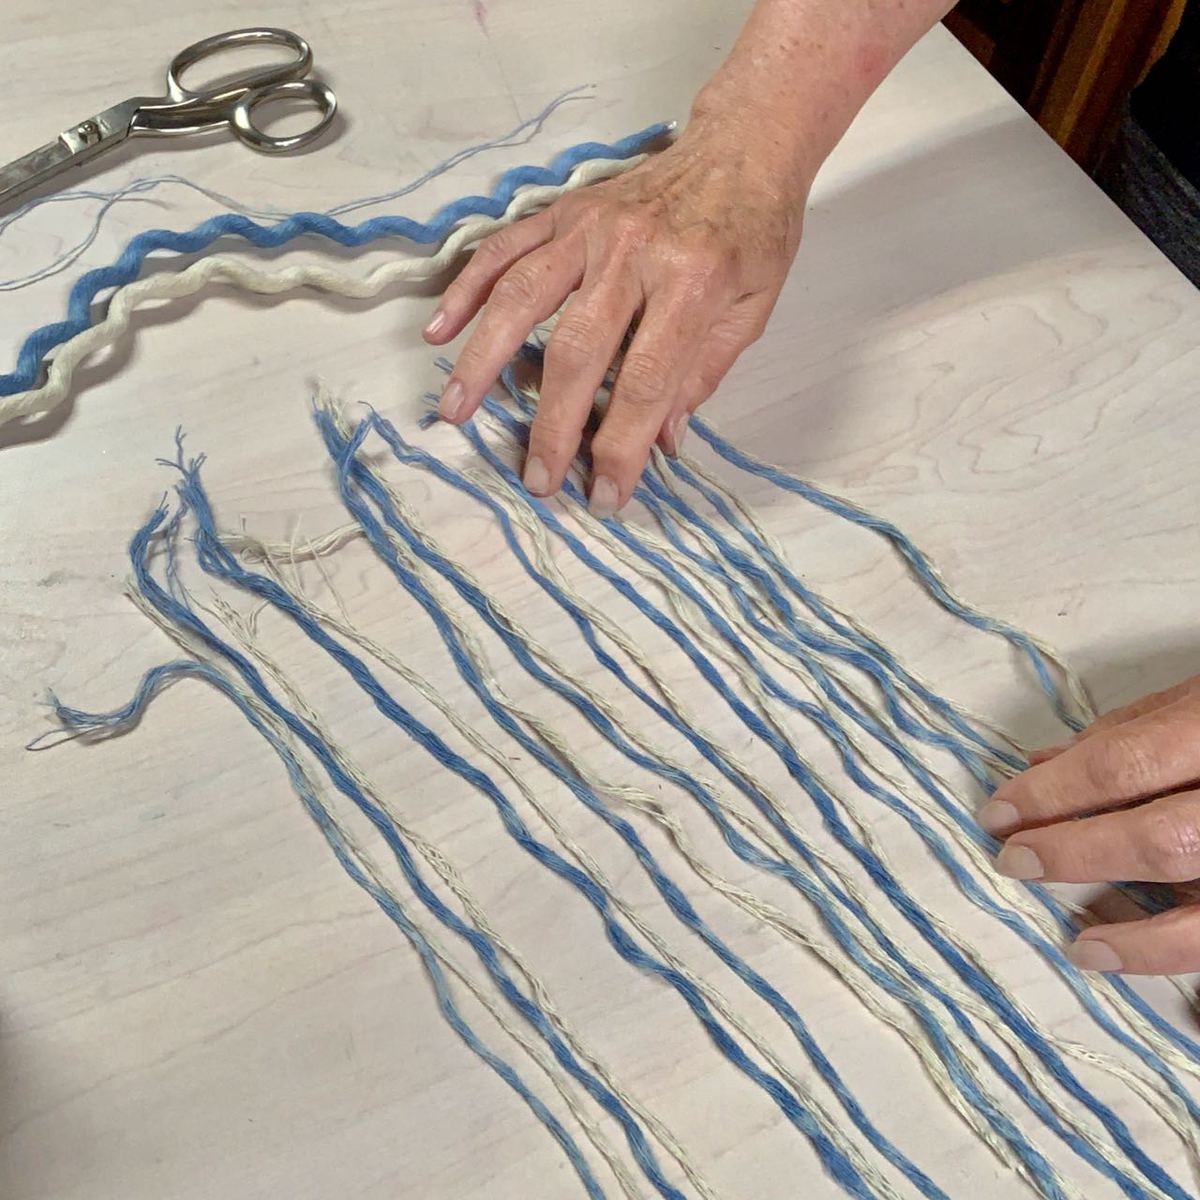 Thin bundles of fibers are laid out on the table in alternating colors